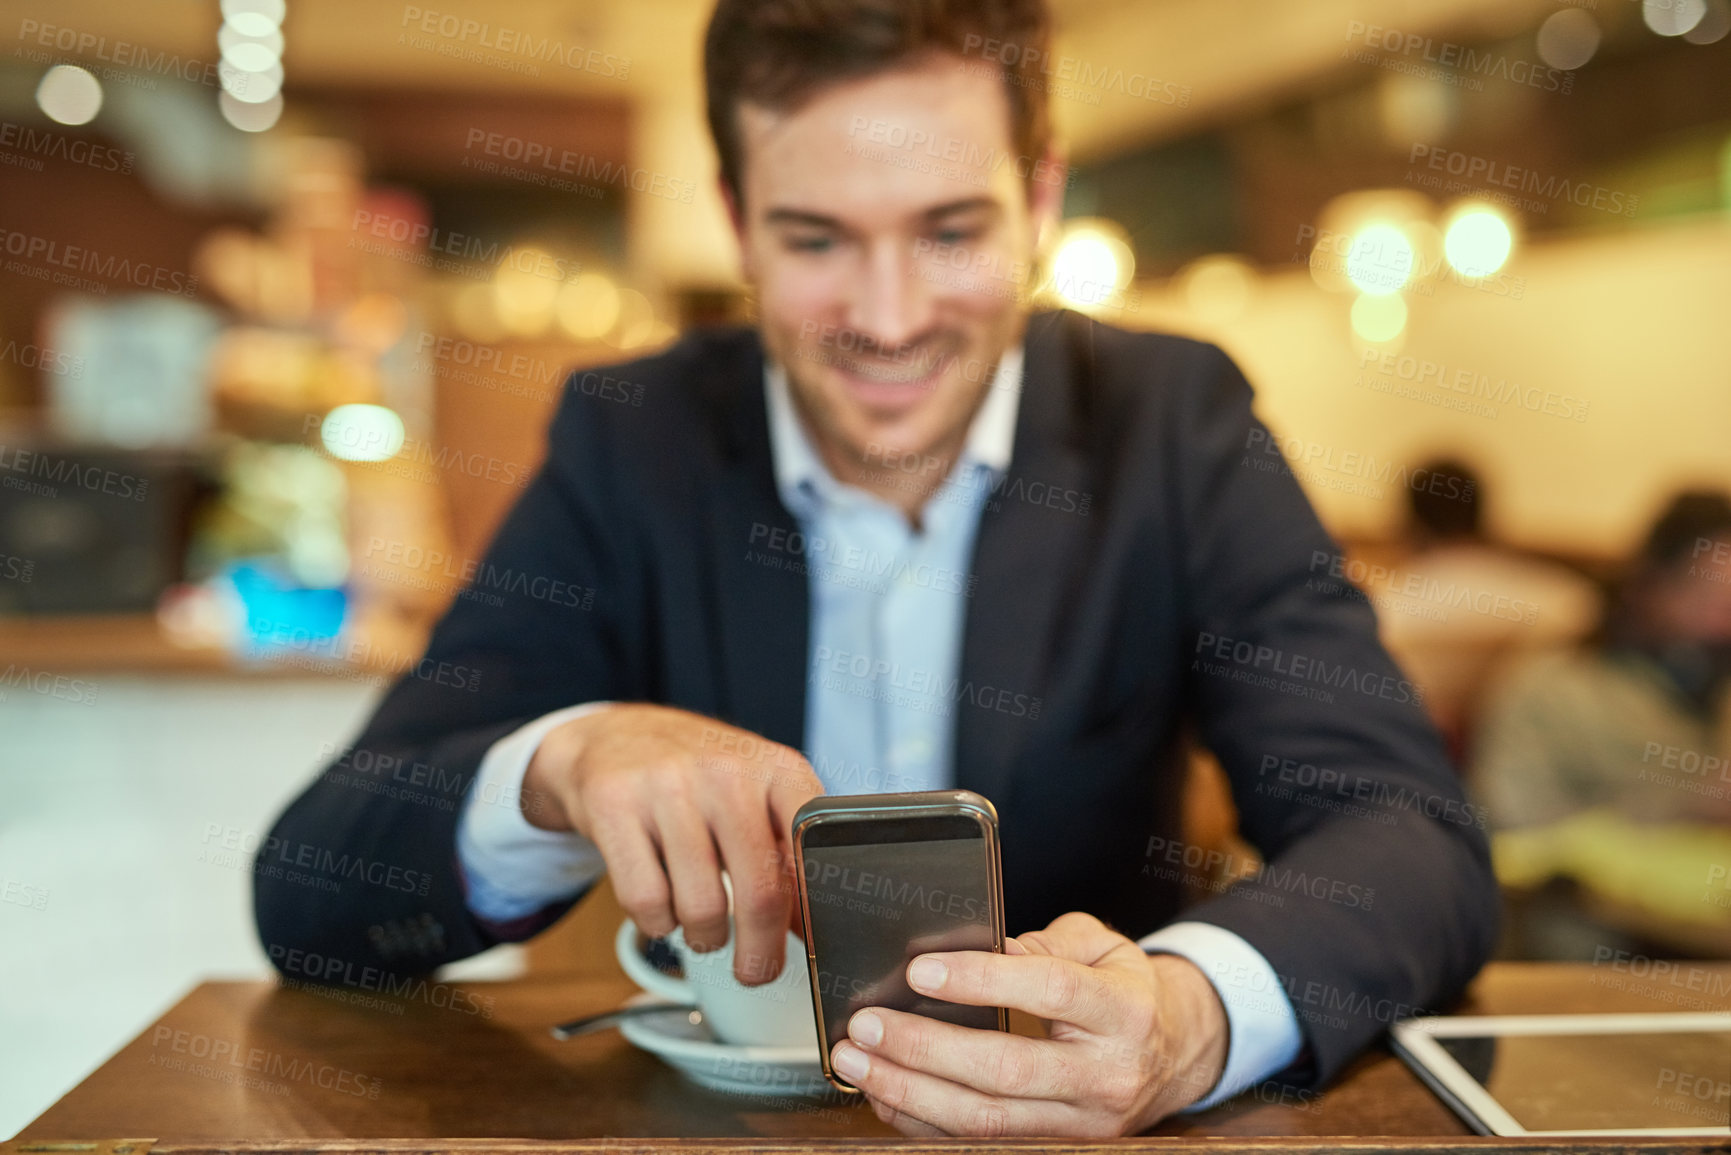 Buy stock photo Shot of a young businessman sending a text message while sitting in a coffee shop